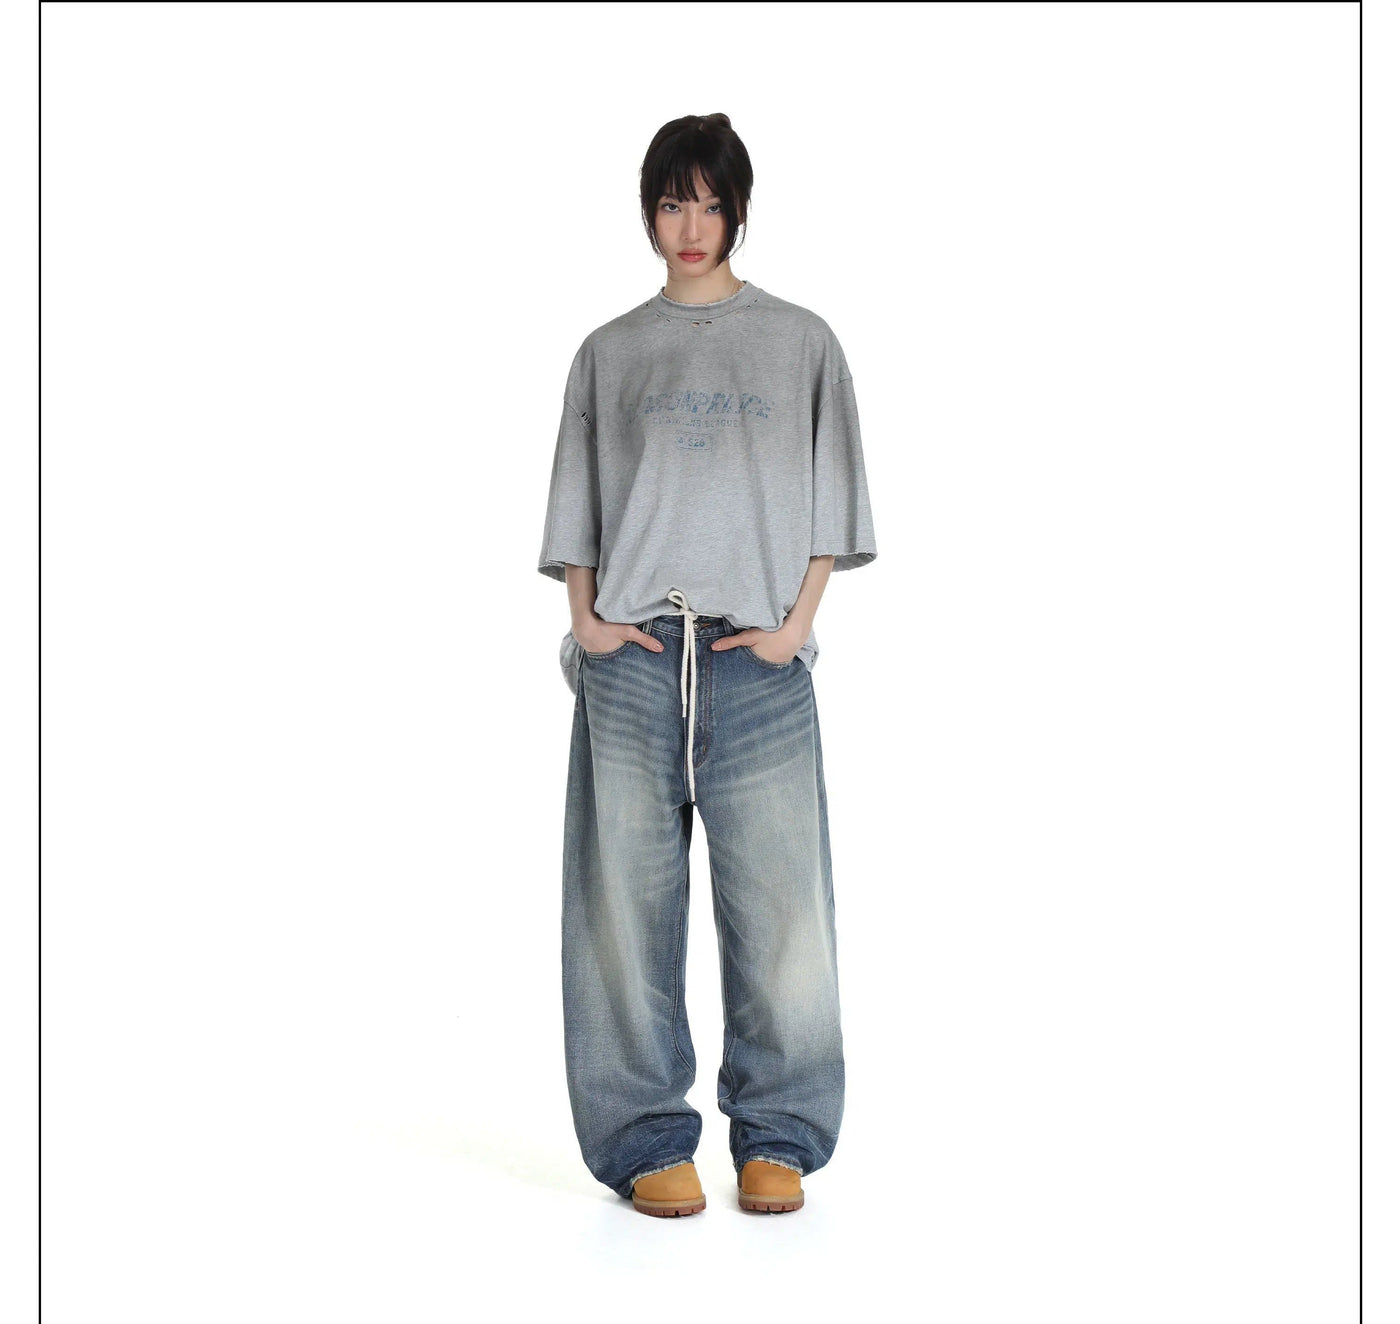 Oversized Raw End Jeans Korean Street Fashion Jeans By Mason Prince Shop Online at OH Vault